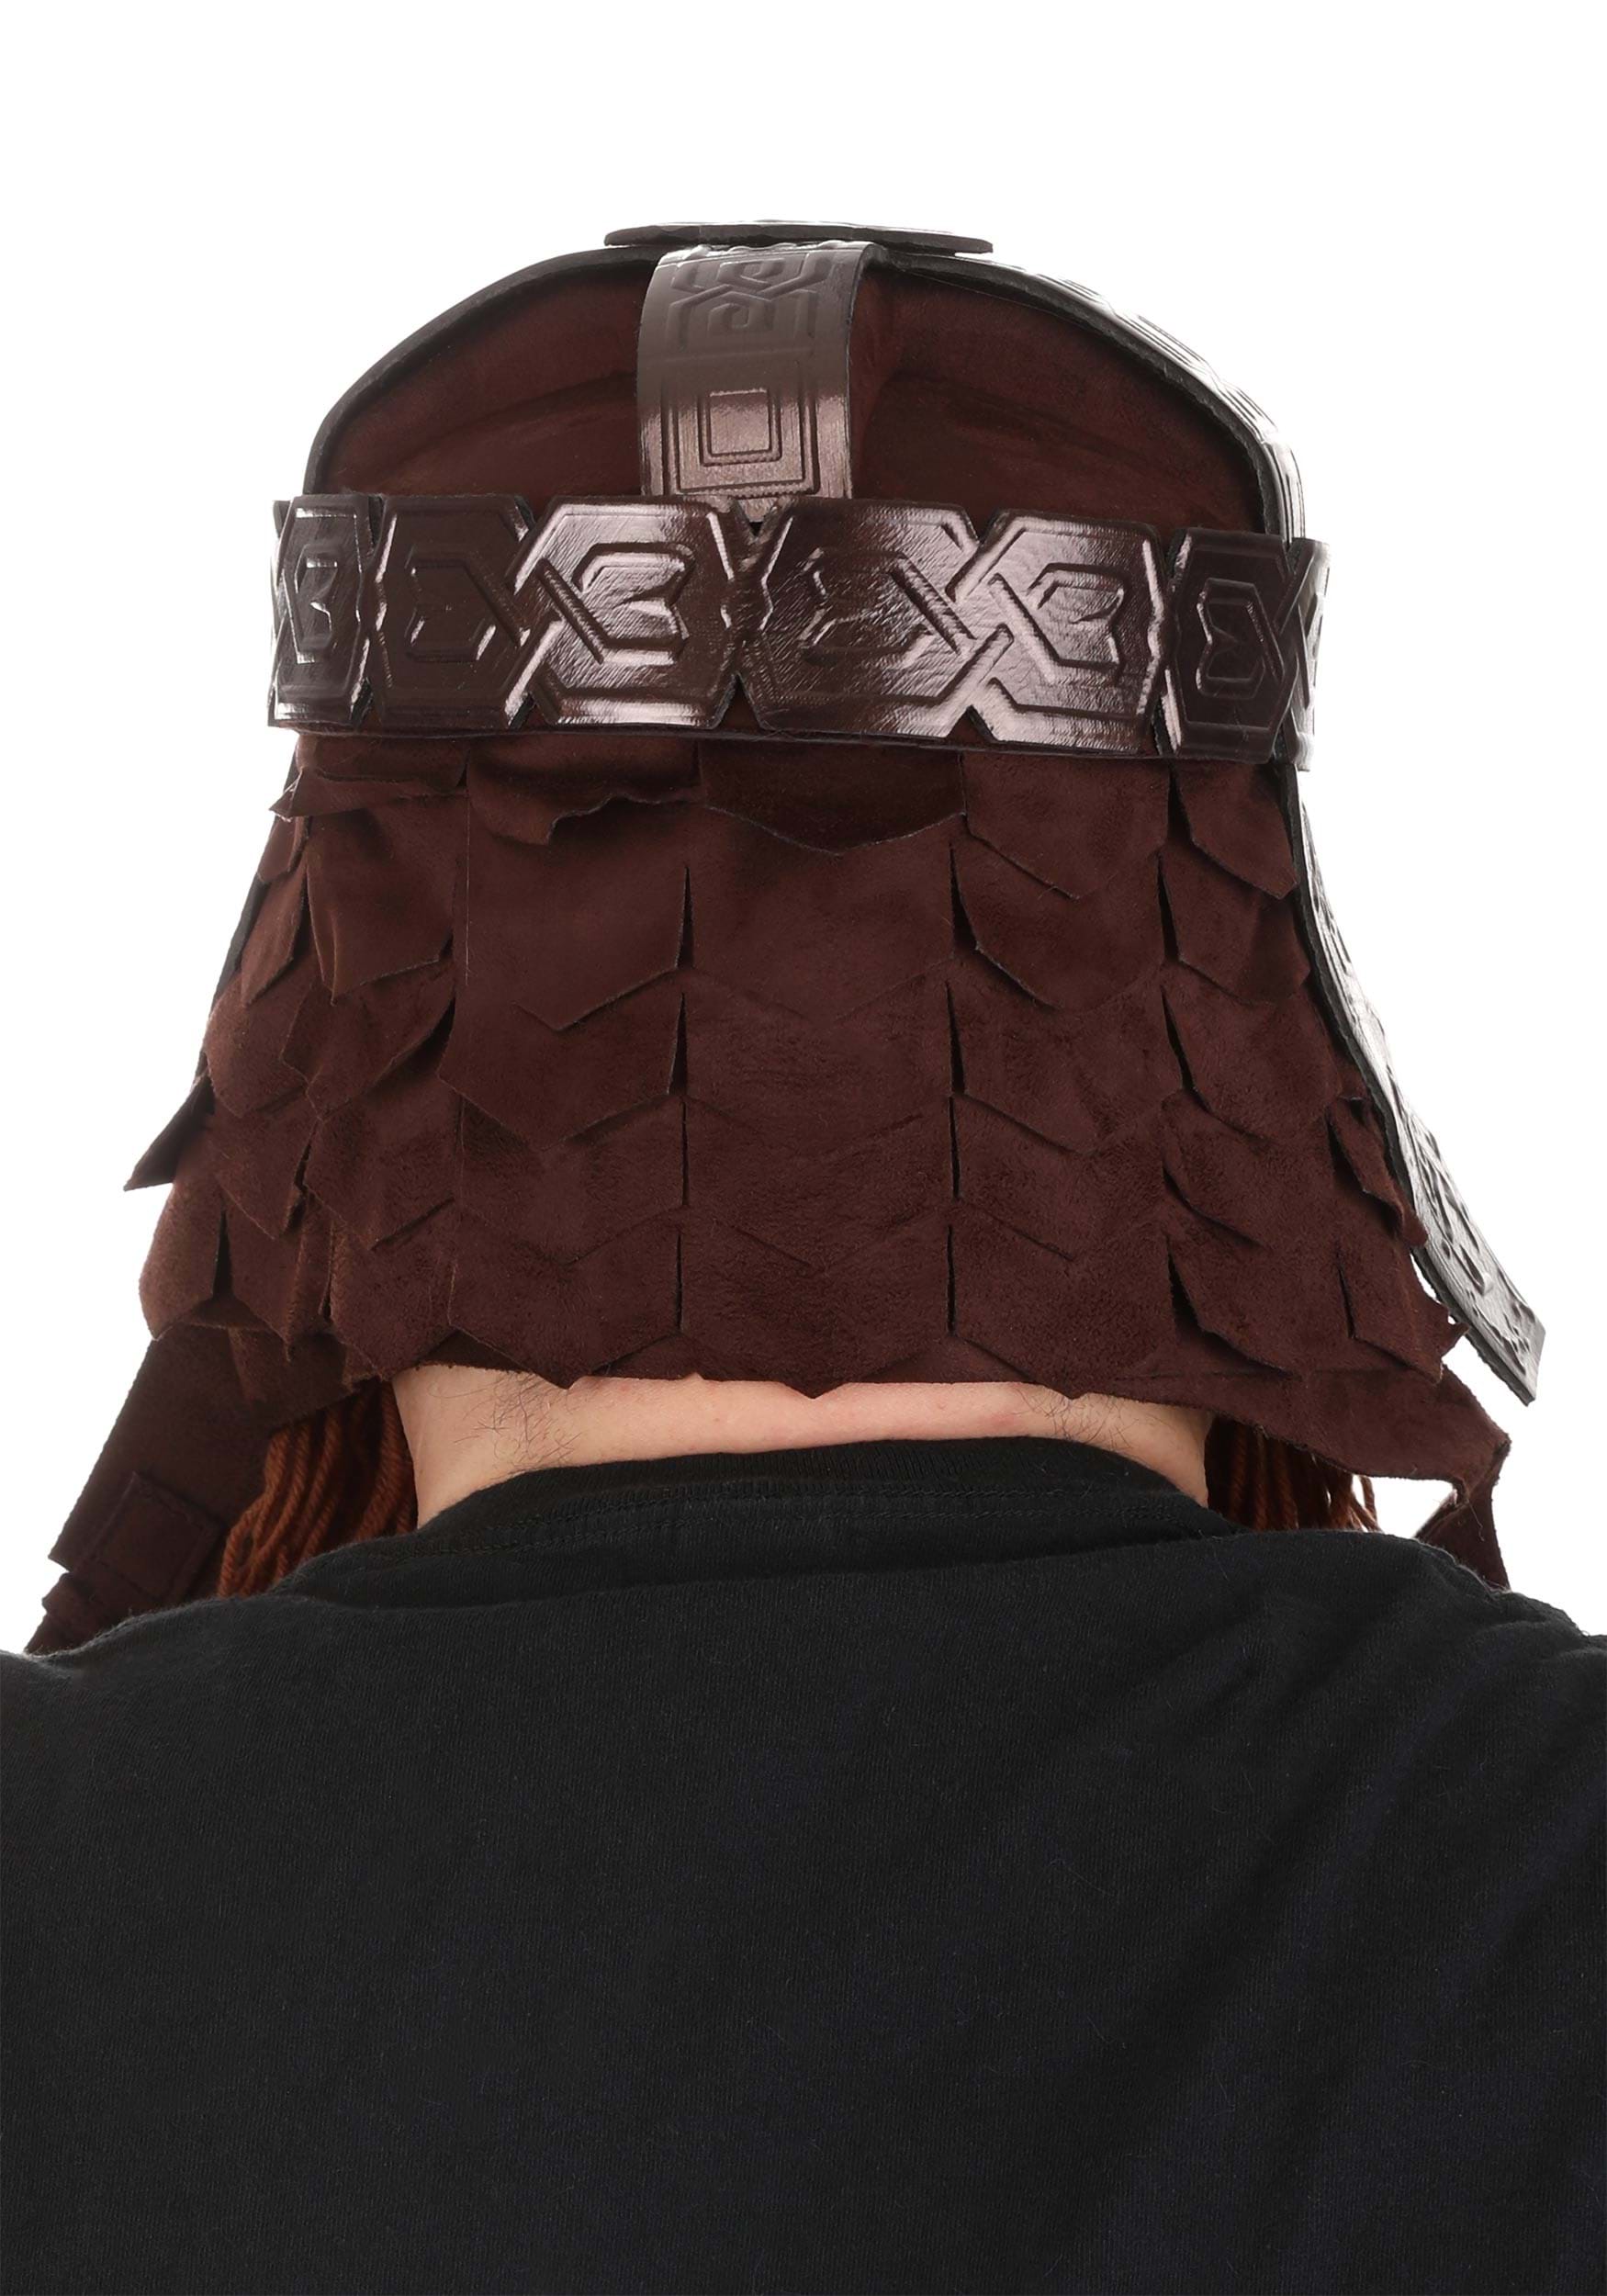 Lord Of The Rings Gimli Hat And Beard Fancy Dress Costume Set